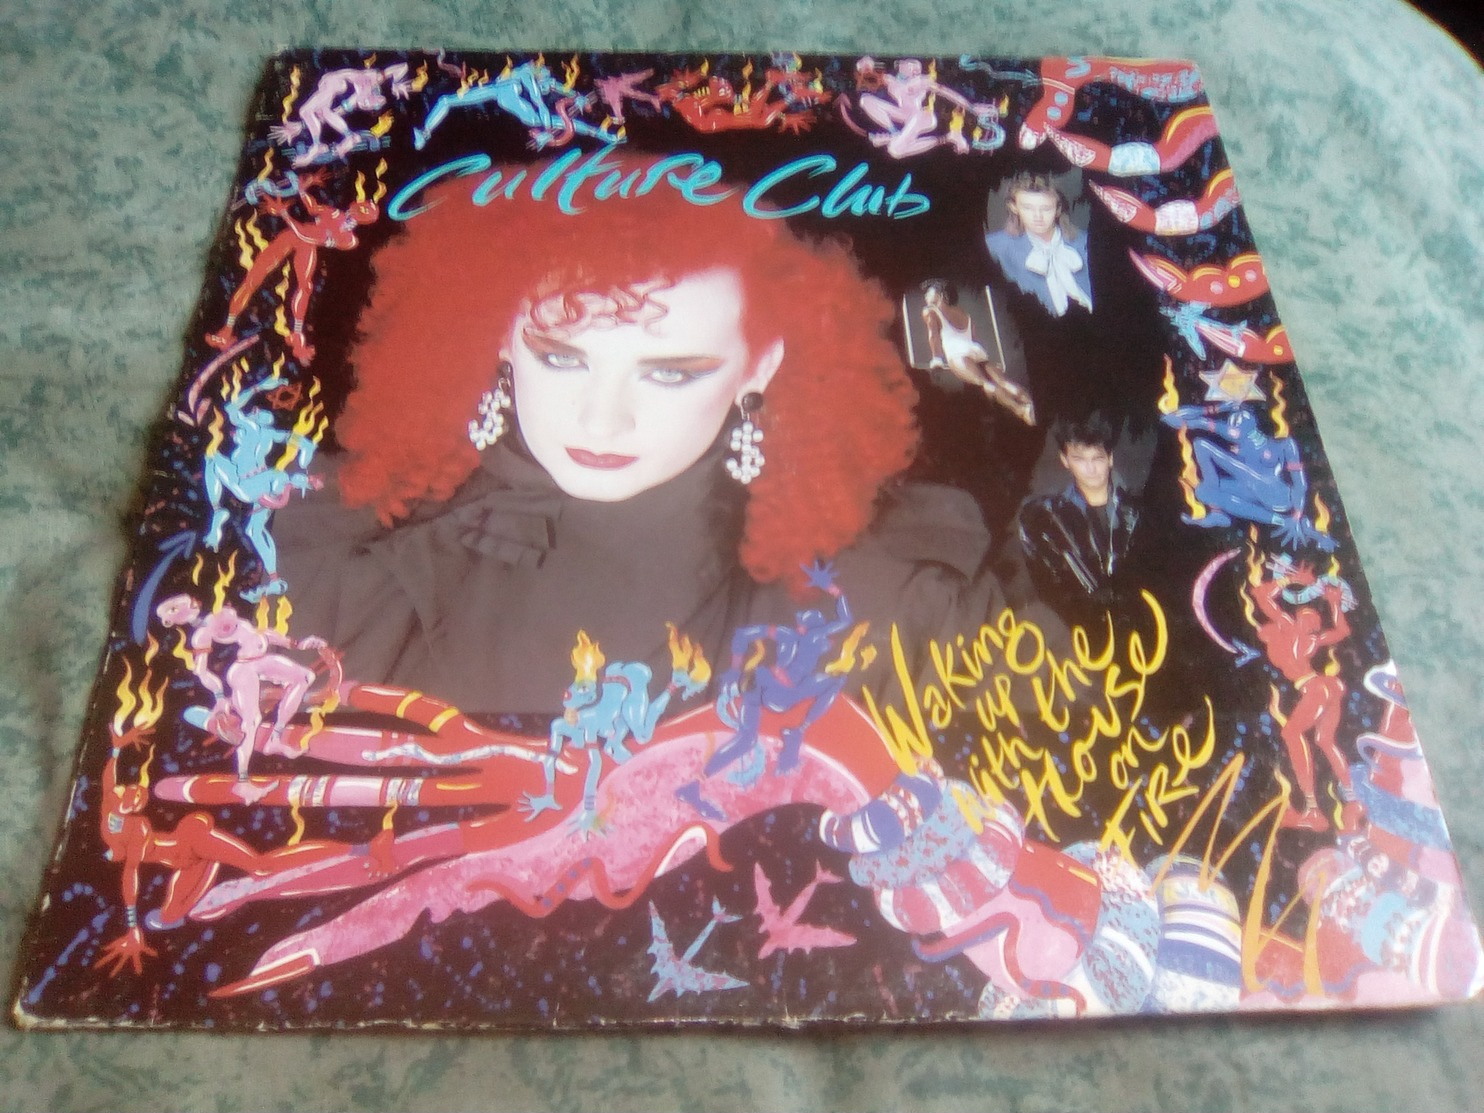 CULTURE CLUB "Waking Up With The House Of Fire" - Rock